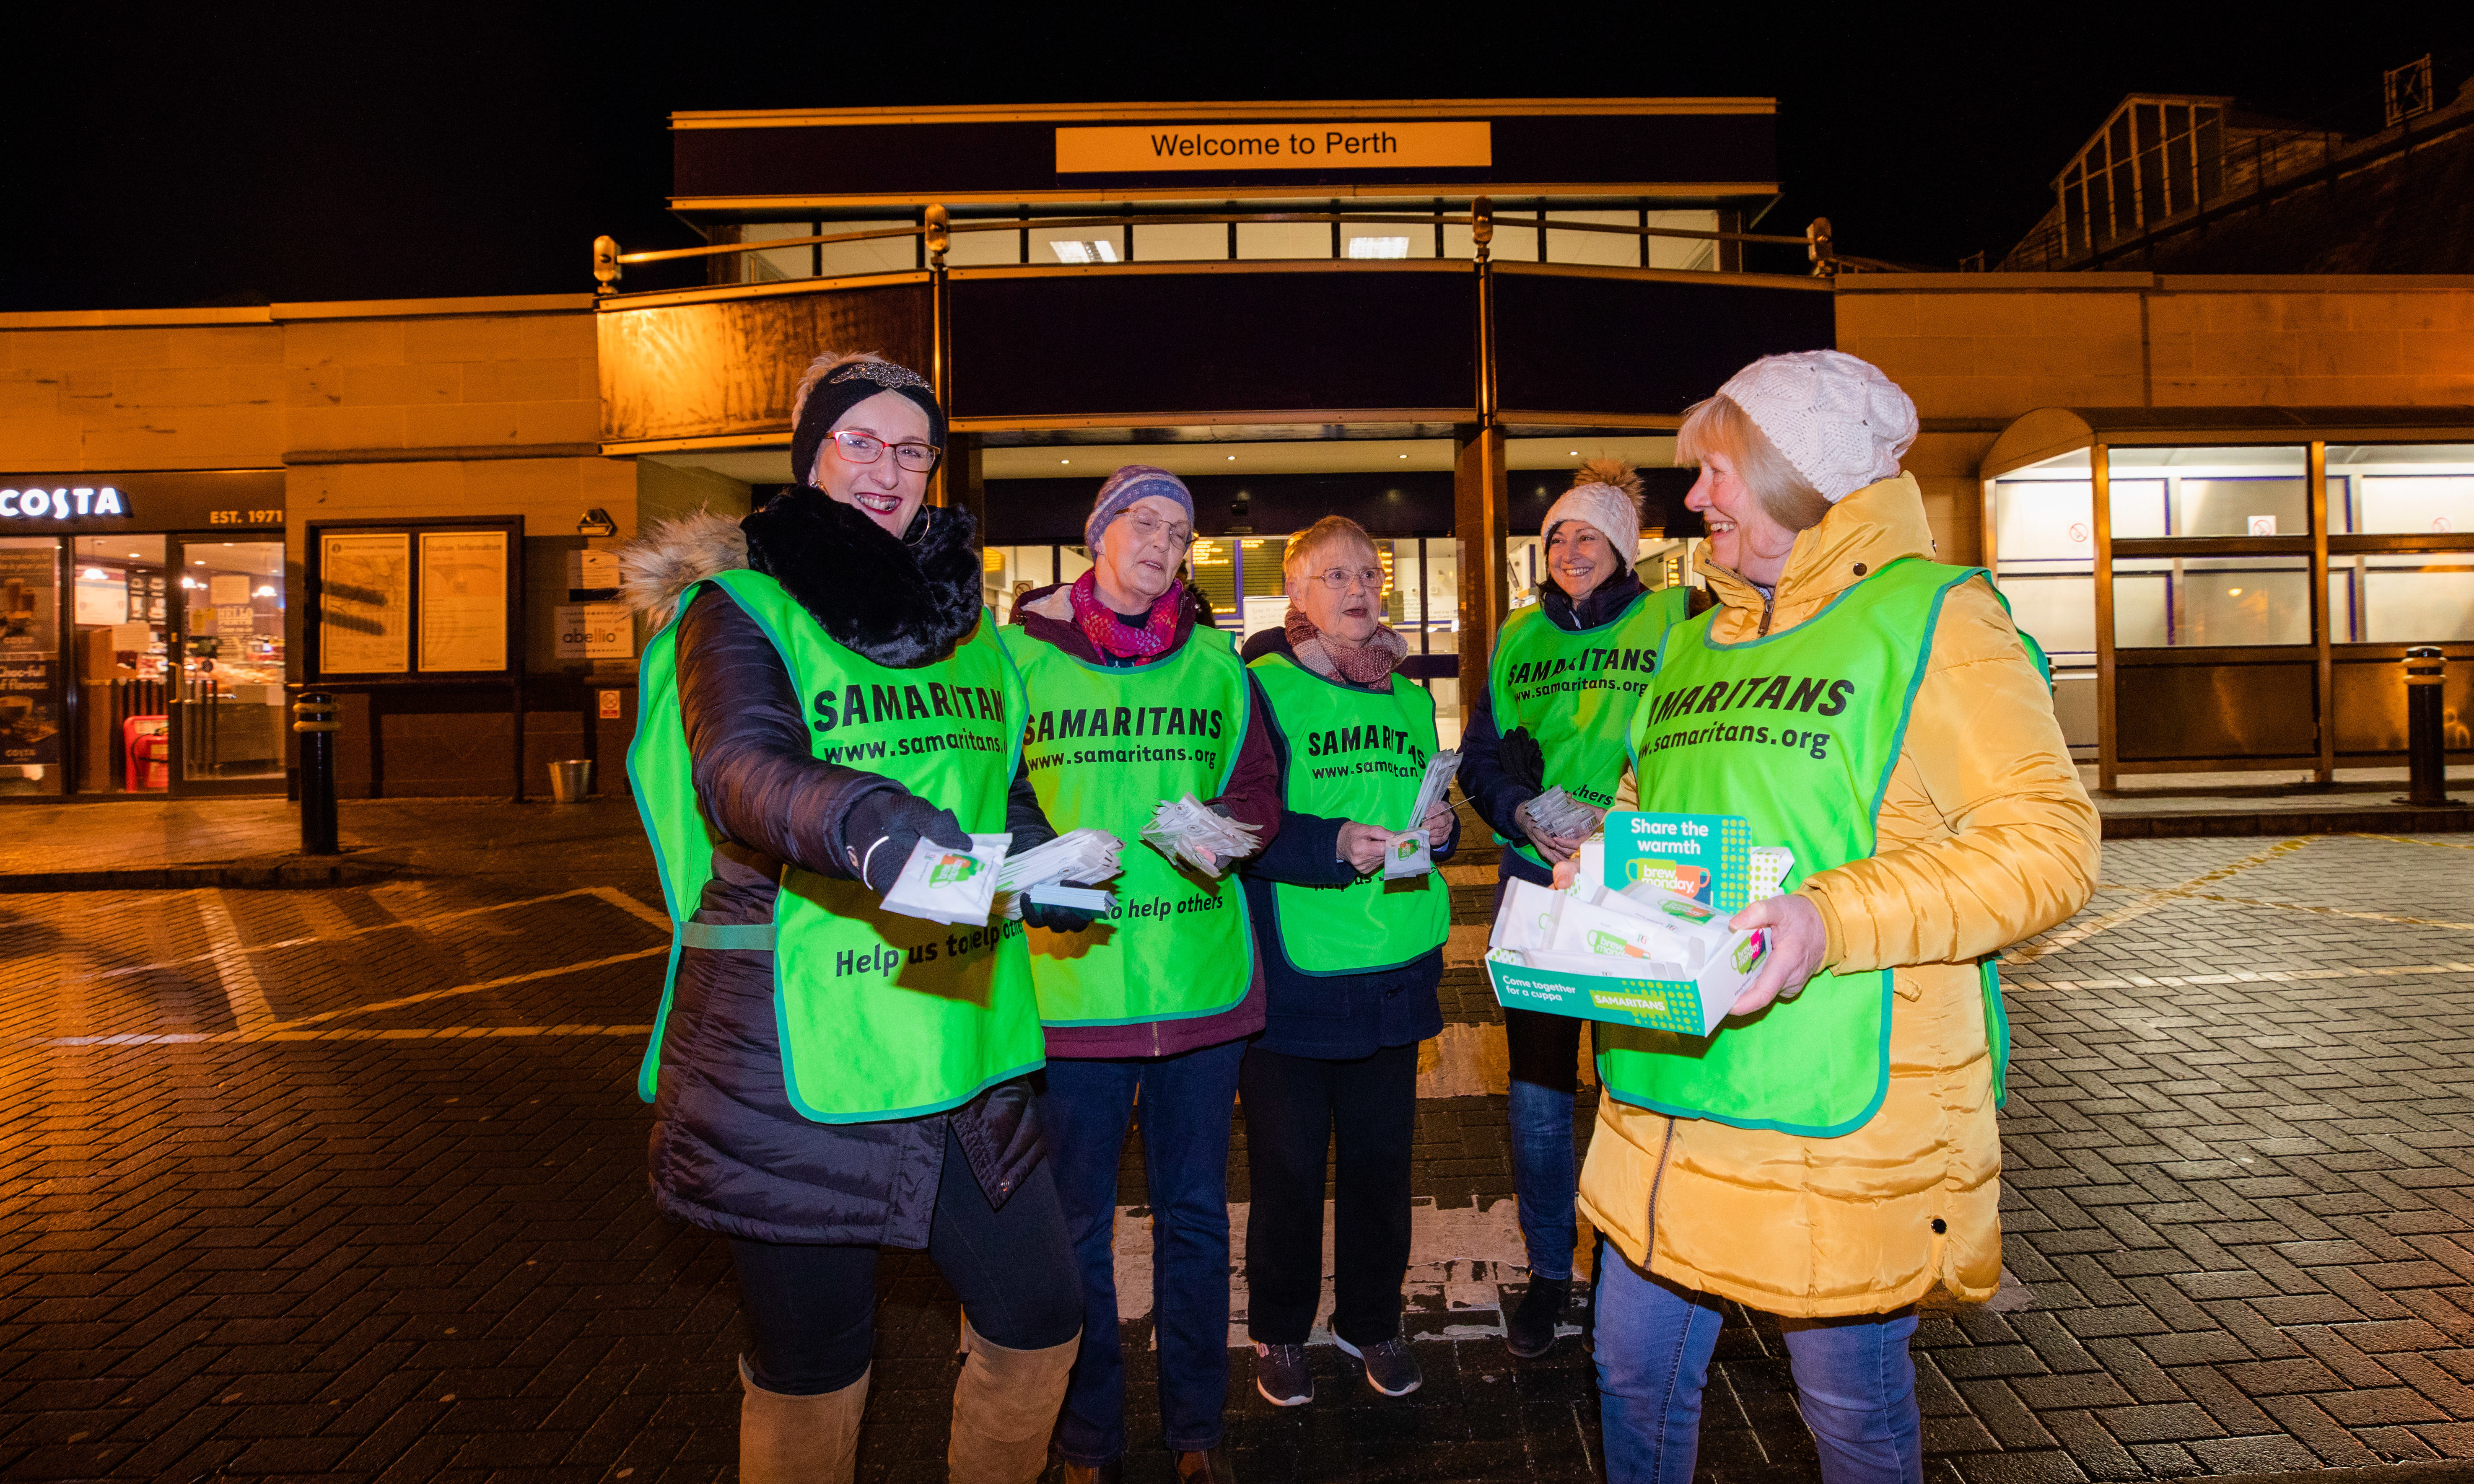 Perth Samaritans Linda, Maggie, Judy, Isla and Emma handed out teabags at Perth Railway Station on Monday.